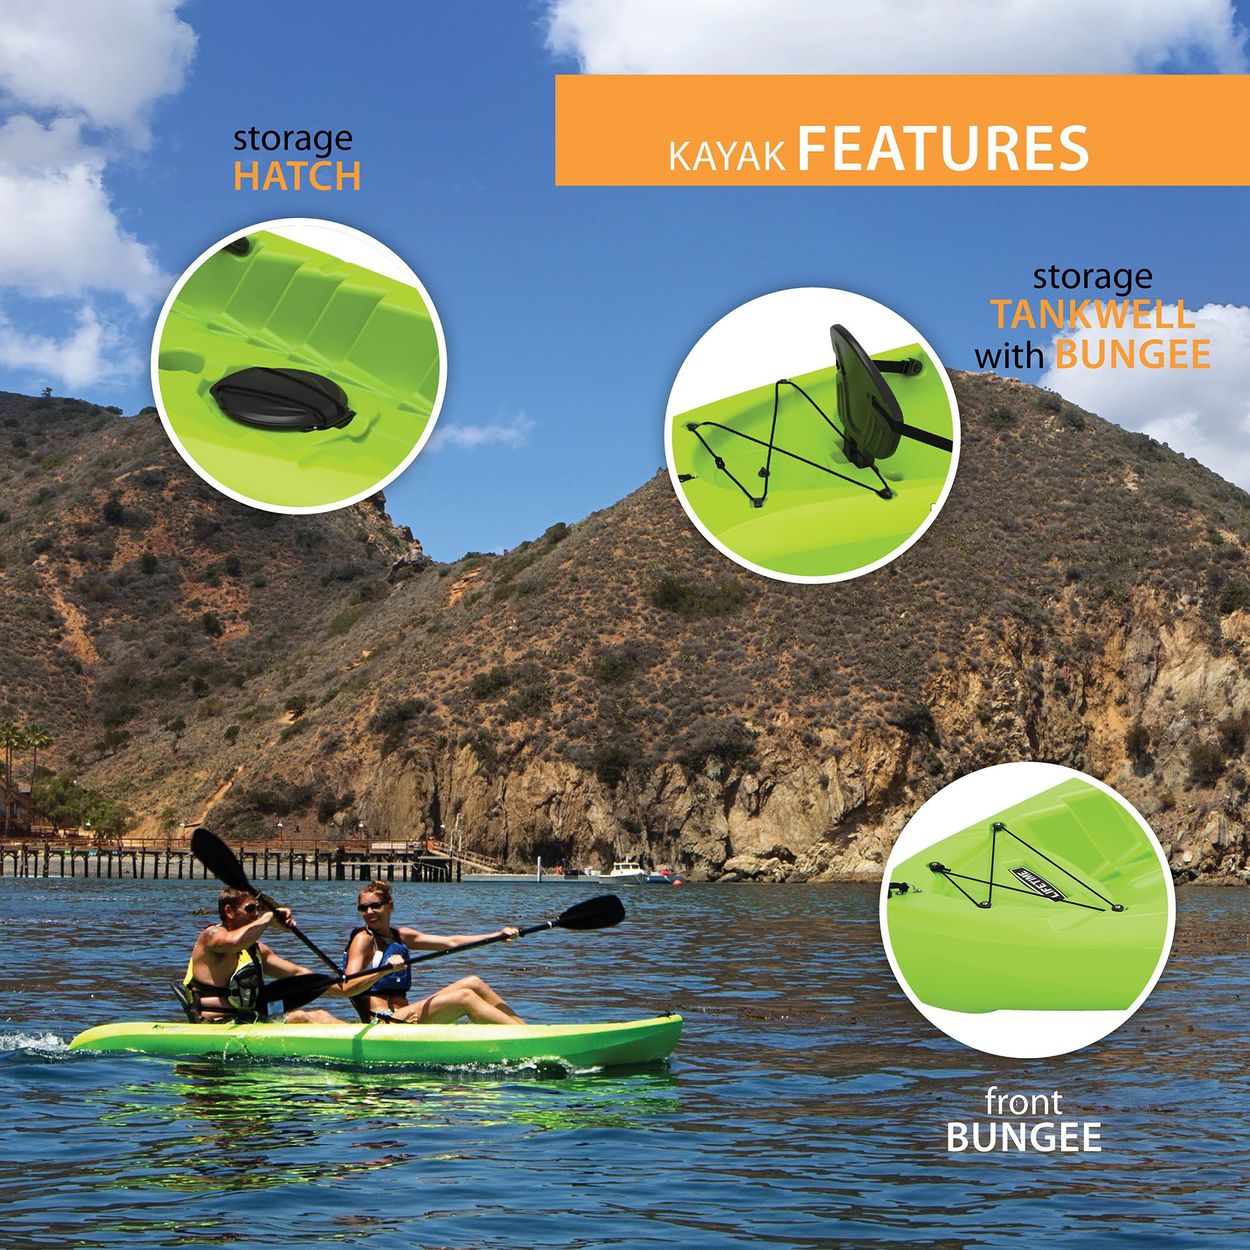 Lifestyle image of kayak on a lake with Features of the hatch, tankwell and bungees in close up images inside bubbles.